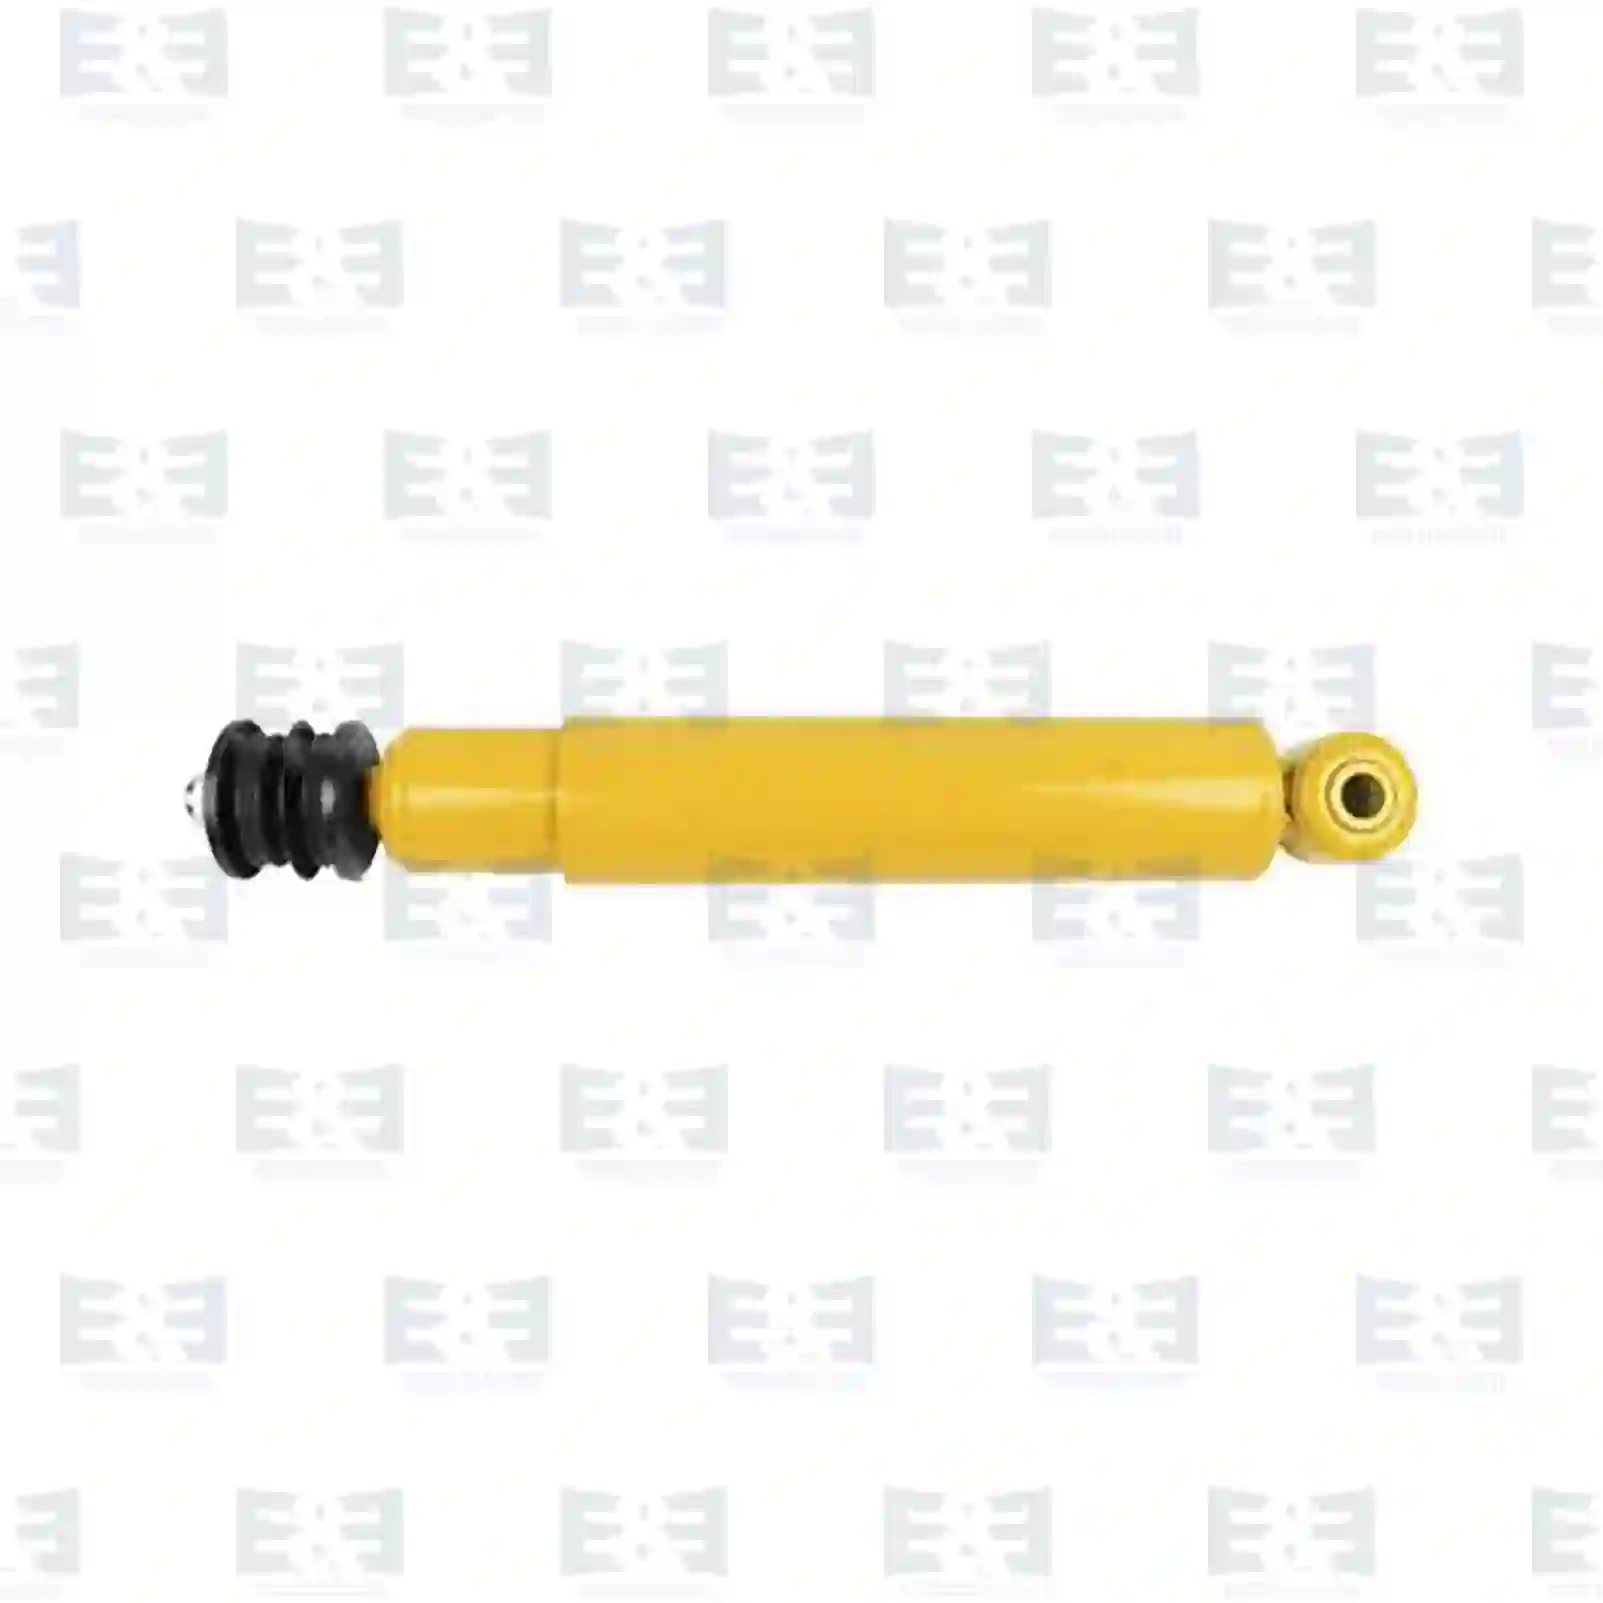 Shock Absorber Shock absorber, EE No 2E2282231 ,  oem no:5010294414, 5010383697, 5010383697A, 5010294414, 5010383697, 7482293218 E&E Truck Spare Parts | Truck Spare Parts, Auotomotive Spare Parts